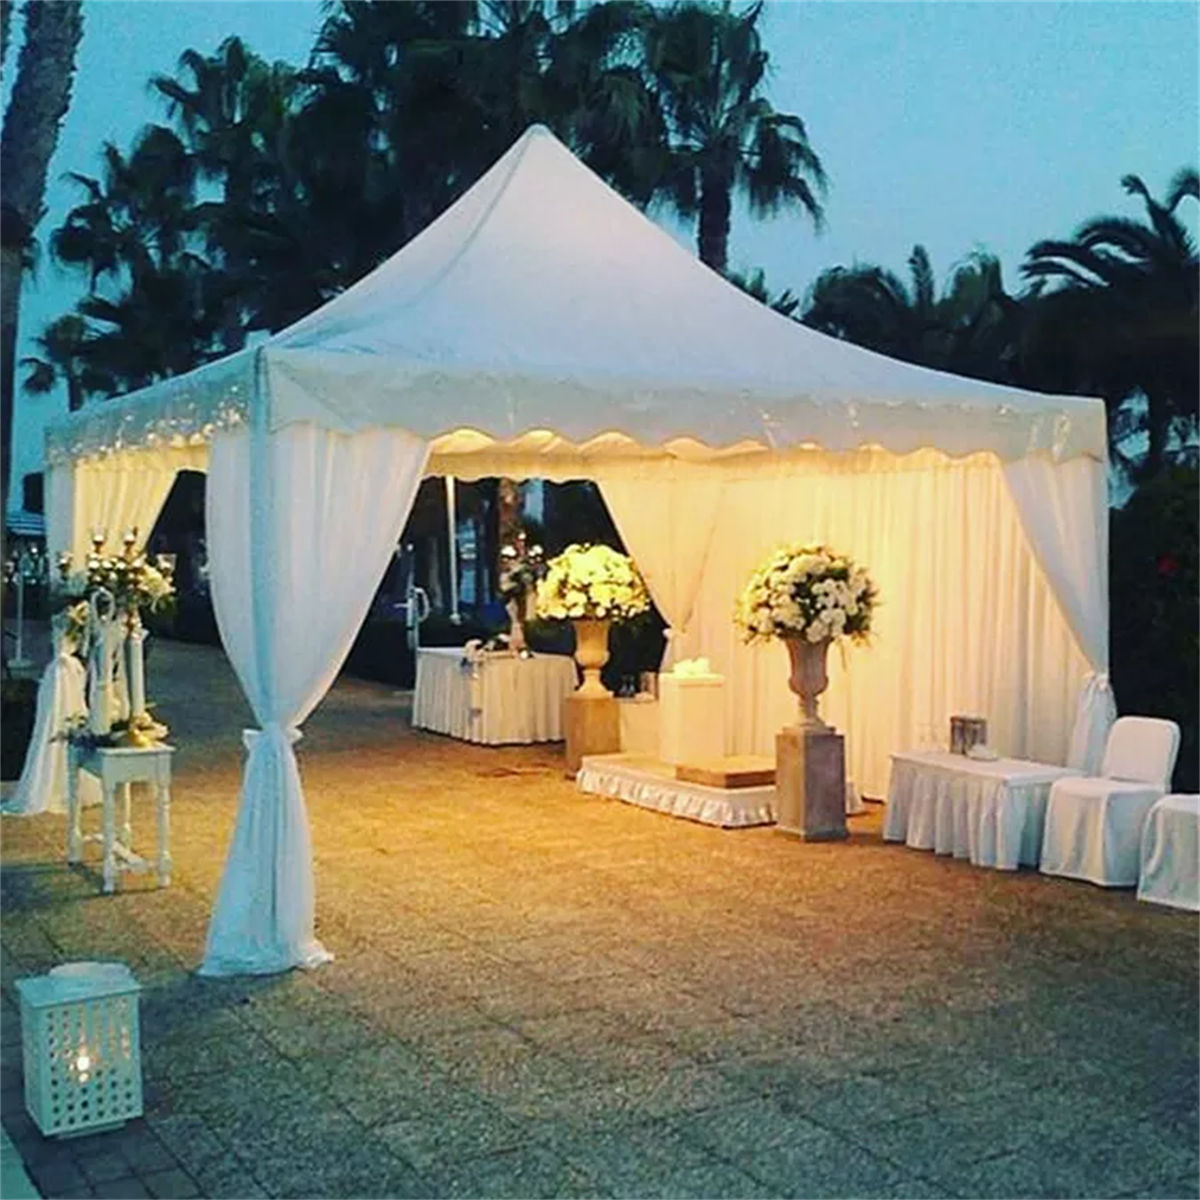 party tents direct 20x40 outdoor wedding canopy event pole tent